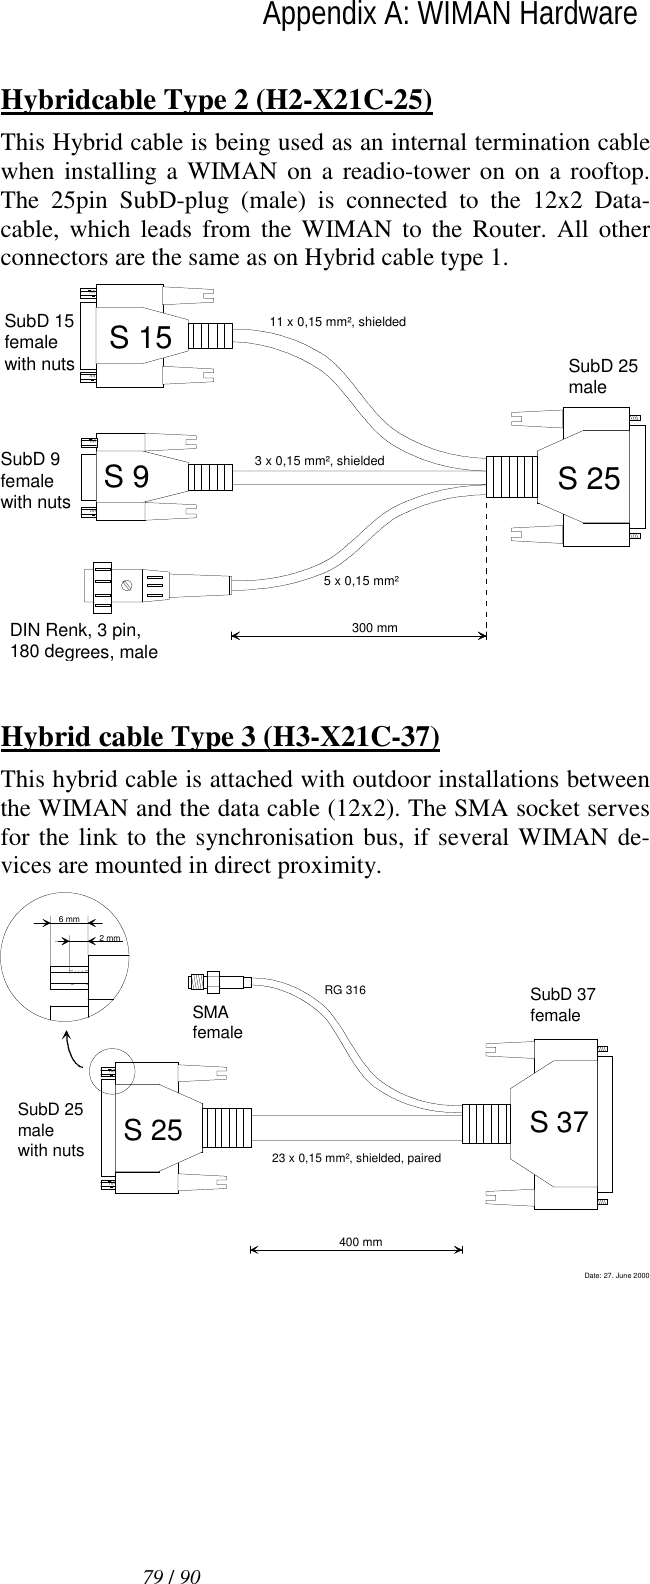   79 / 90lAppendix A: WIMAN Hardware  Hybridcable Type 2 (H2-X21C-25) This Hybrid cable is being used as an internal termination cable when installing a WIMAN on a readio-tower on on a rooftop. The 25pin SubD-plug (male) is connected to the 12x2 Data-cable, which leads from the WIMAN to the Router. All other connectors are the same as on Hybrid cable type 1. SubD 25maleS 2511 x 0,15 mm², shielded5 x 0,15 mm²3 x 0,15 mm², shieldedSubD 15femalewith nuts300 mmS 15S 9SubD 9femalewith nutsDIN Renk, 3 pin,180 degrees, male   Hybrid cable Type 3 (H3-X21C-37) This hybrid cable is attached with outdoor installations between the WIMAN and the data cable (12x2). The SMA socket serves for the link to the synchronisation bus, if several WIMAN de-vices are mounted in direct proximity. S 37SubD 37femaleSMAfemaleSubD 25malewith nutsRG 31623 x 0,15 mm², shielded, paired400 mmS 25Date: 27. June 20002 mm6 mm 